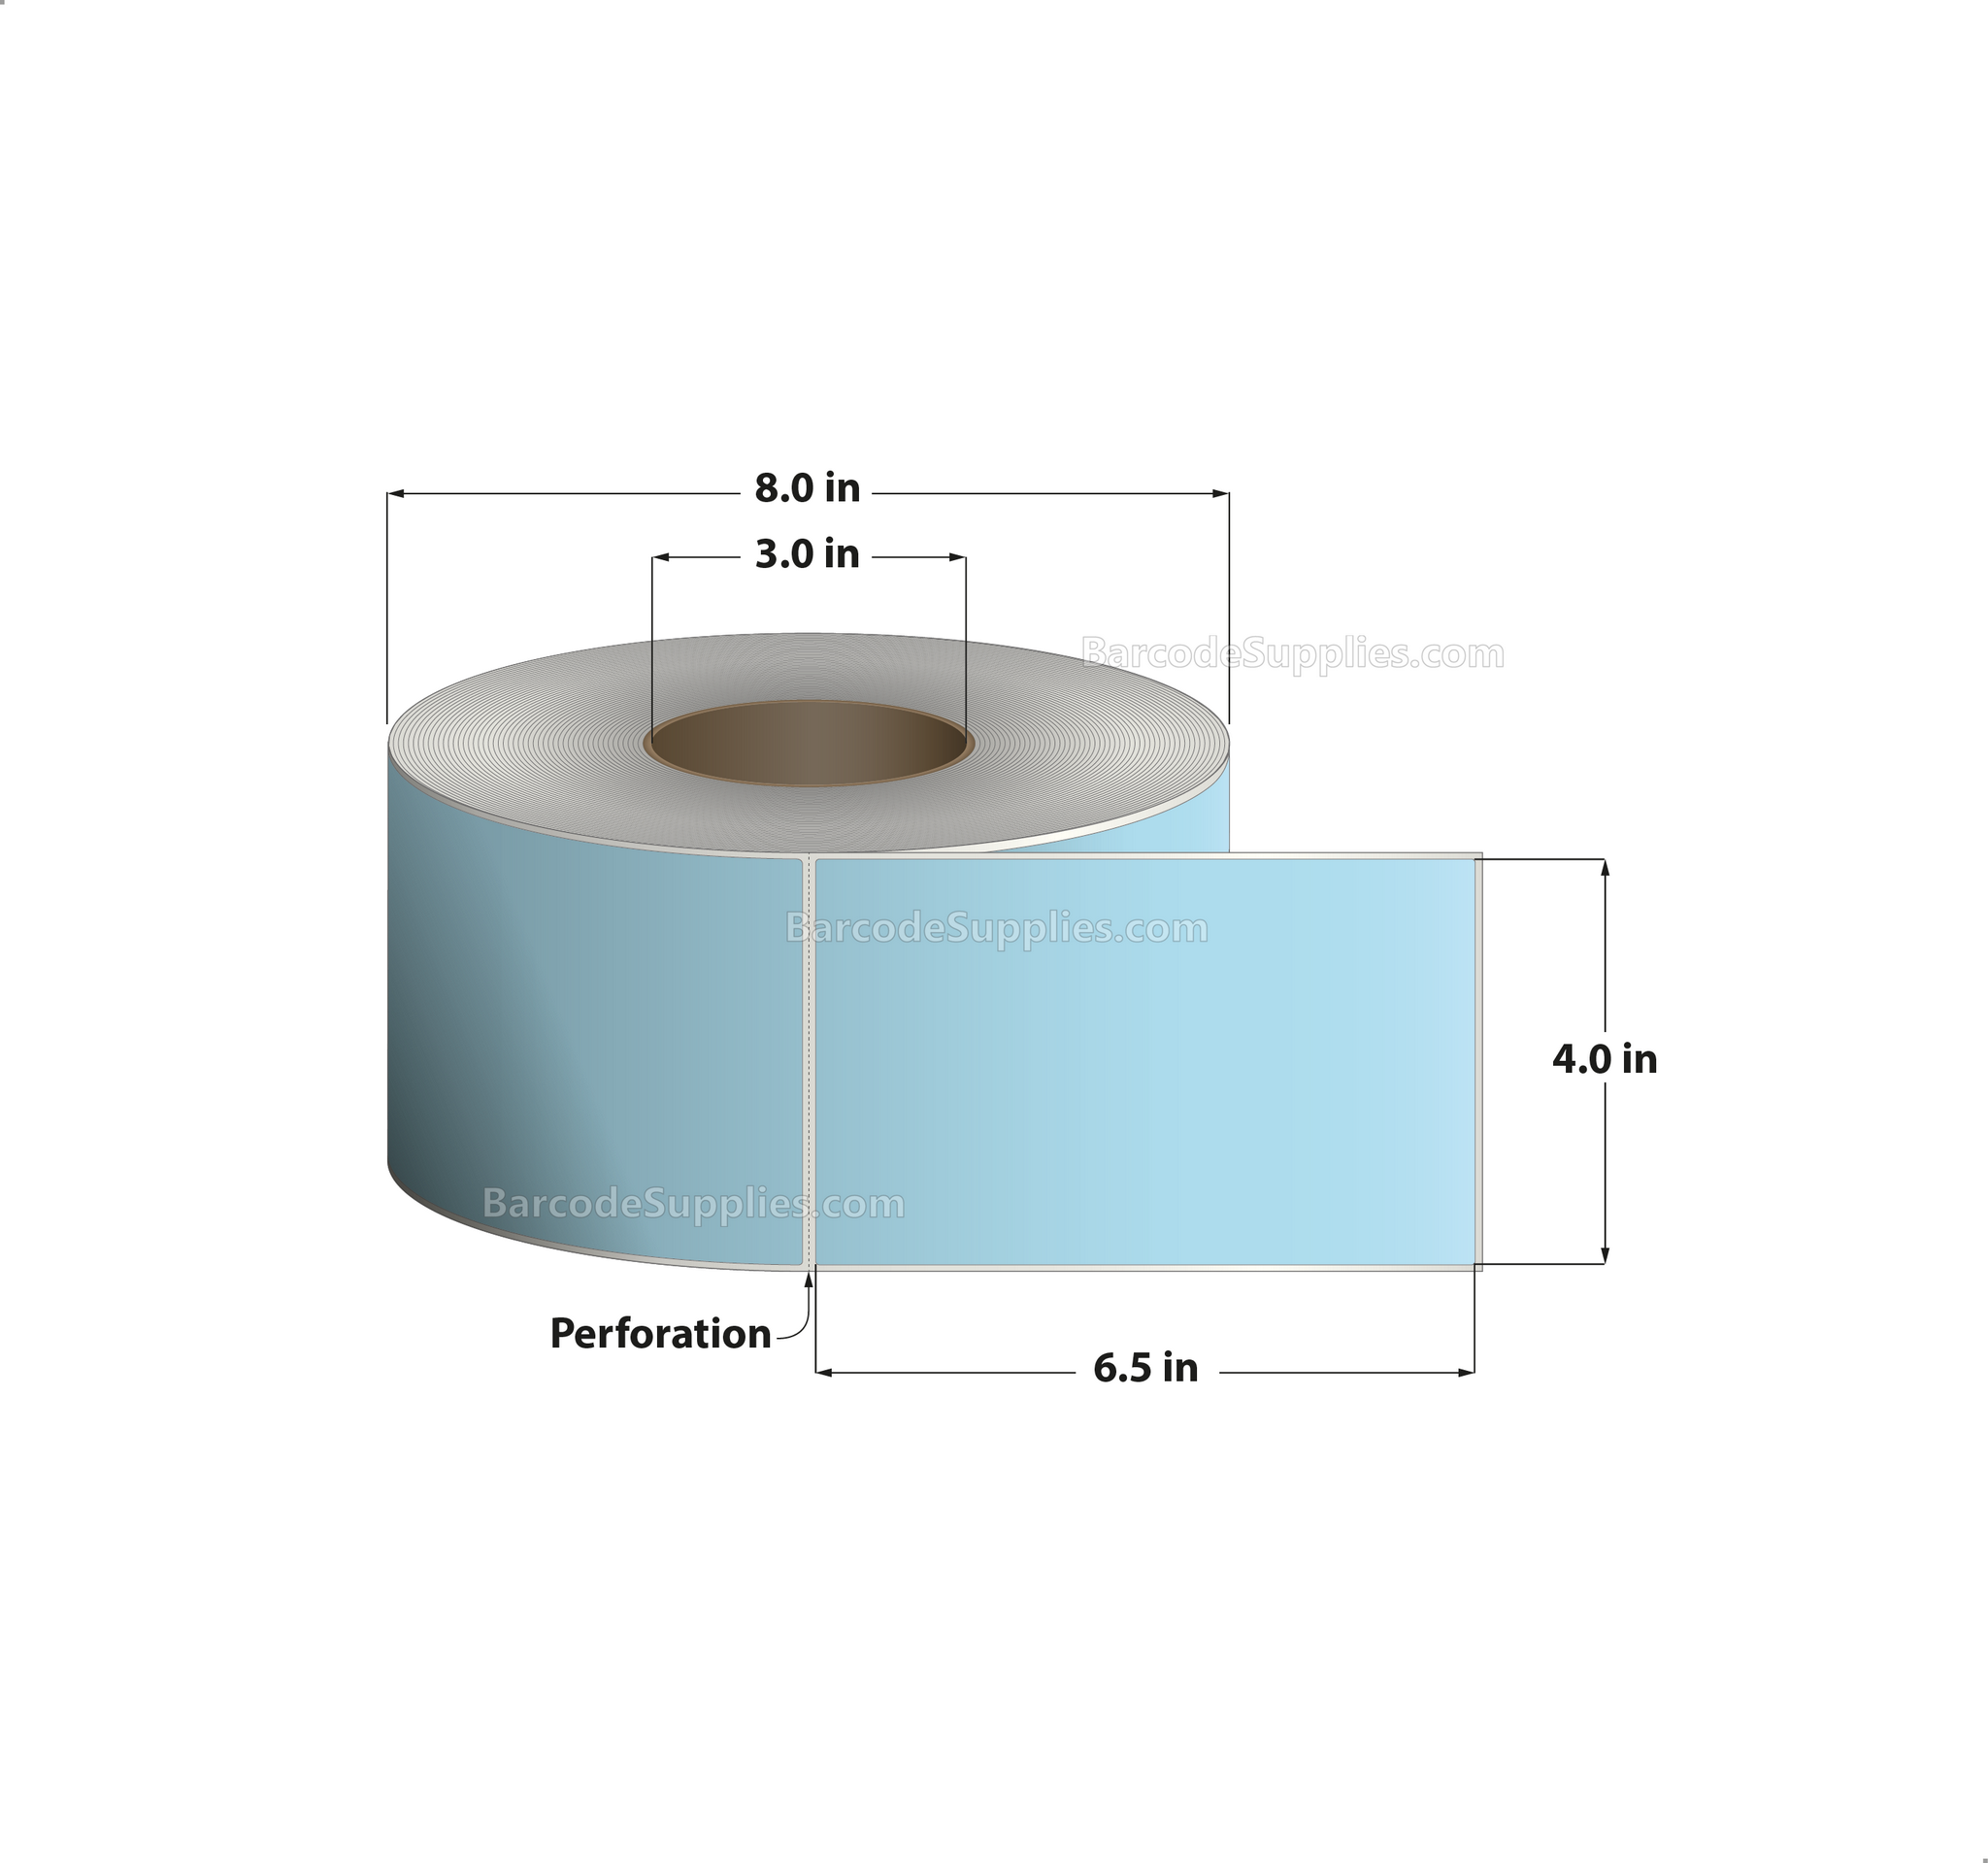 4 x 6.5 Thermal Transfer 2975 Blue Labels With Permanent Acrylic Adhesive - Perforated - 900 Labels Per Roll - Carton Of 4 Rolls - 3600 Labels Total - MPN: TH465-1PBL